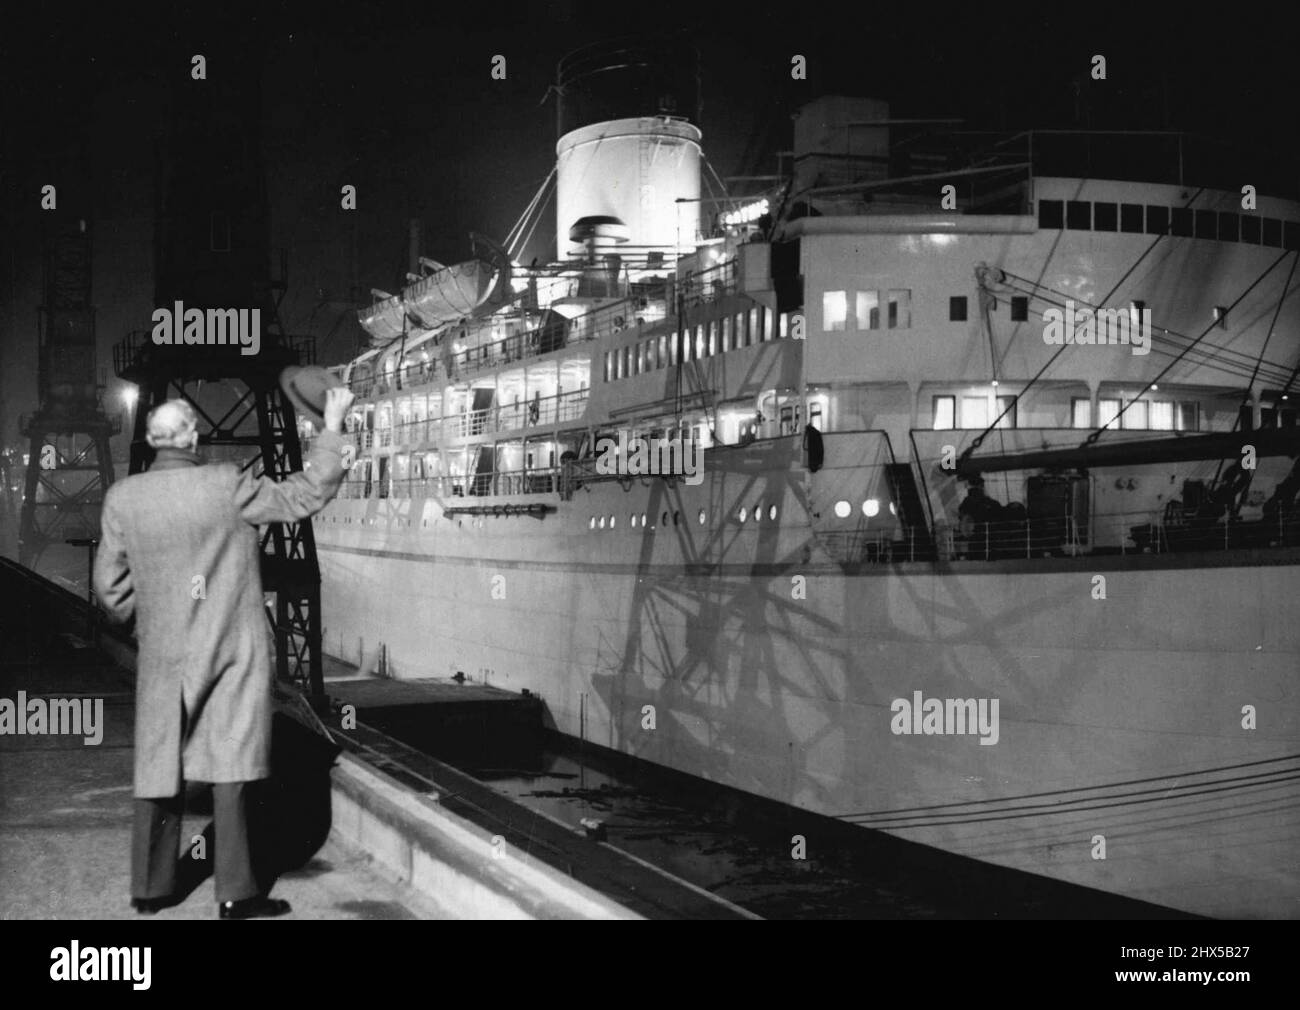 The 'Gothic' Sails for Jamaica -- An unidentified person waves from the quay side as the Royal tour ship 'Gothic' moves away from King George V Dock, to slip down the River Thames on tonight's tide, November 10th. For two hours in the afternoon, Mr. Basil Sanderson, chairman of the Shaw Savill Line, inspected her. Finally he agreed she was ready for the tour. The liner was on her way to Jamaica, where the Queen and the Duke of Edinburgh will join her November 27th. November 11, 1953. (Photo by Associated Press Photo). Stock Photo